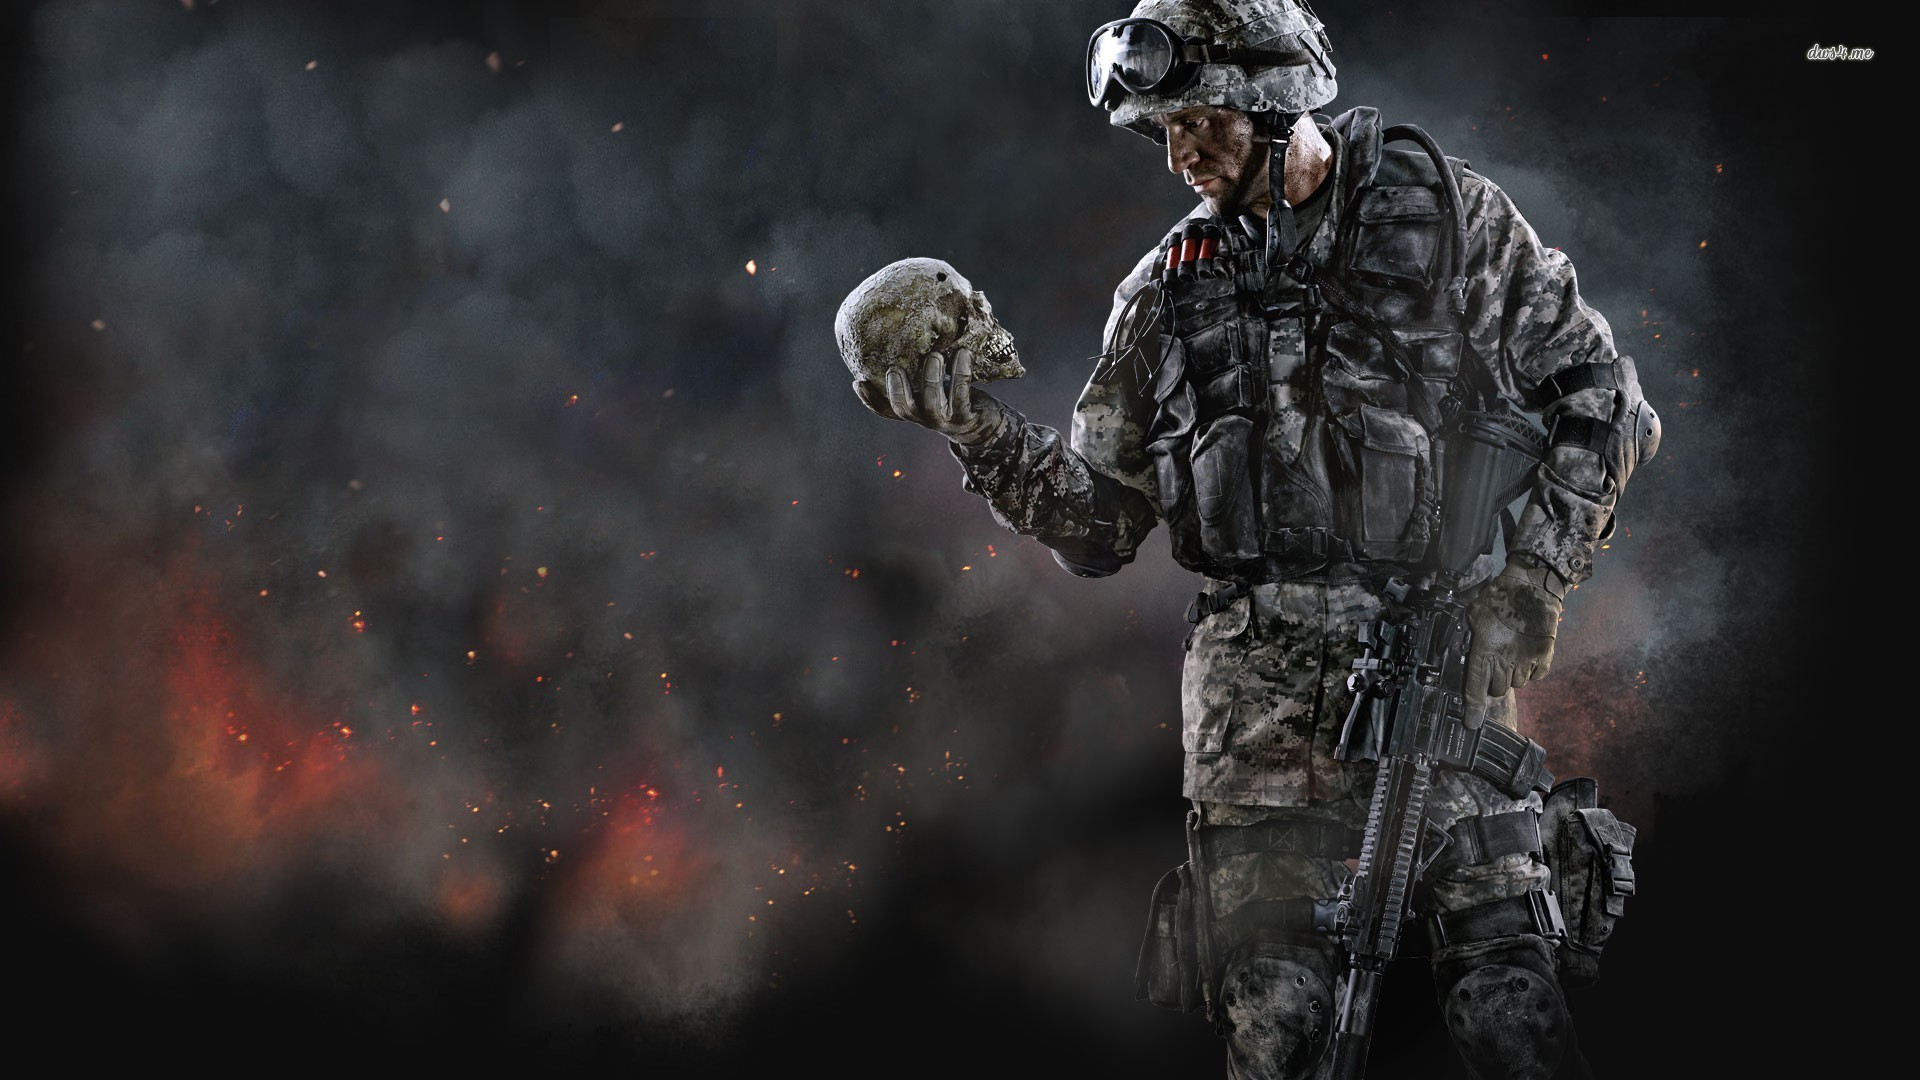 1920x1080 100% Quality HD Warface Images Collection for Desktop